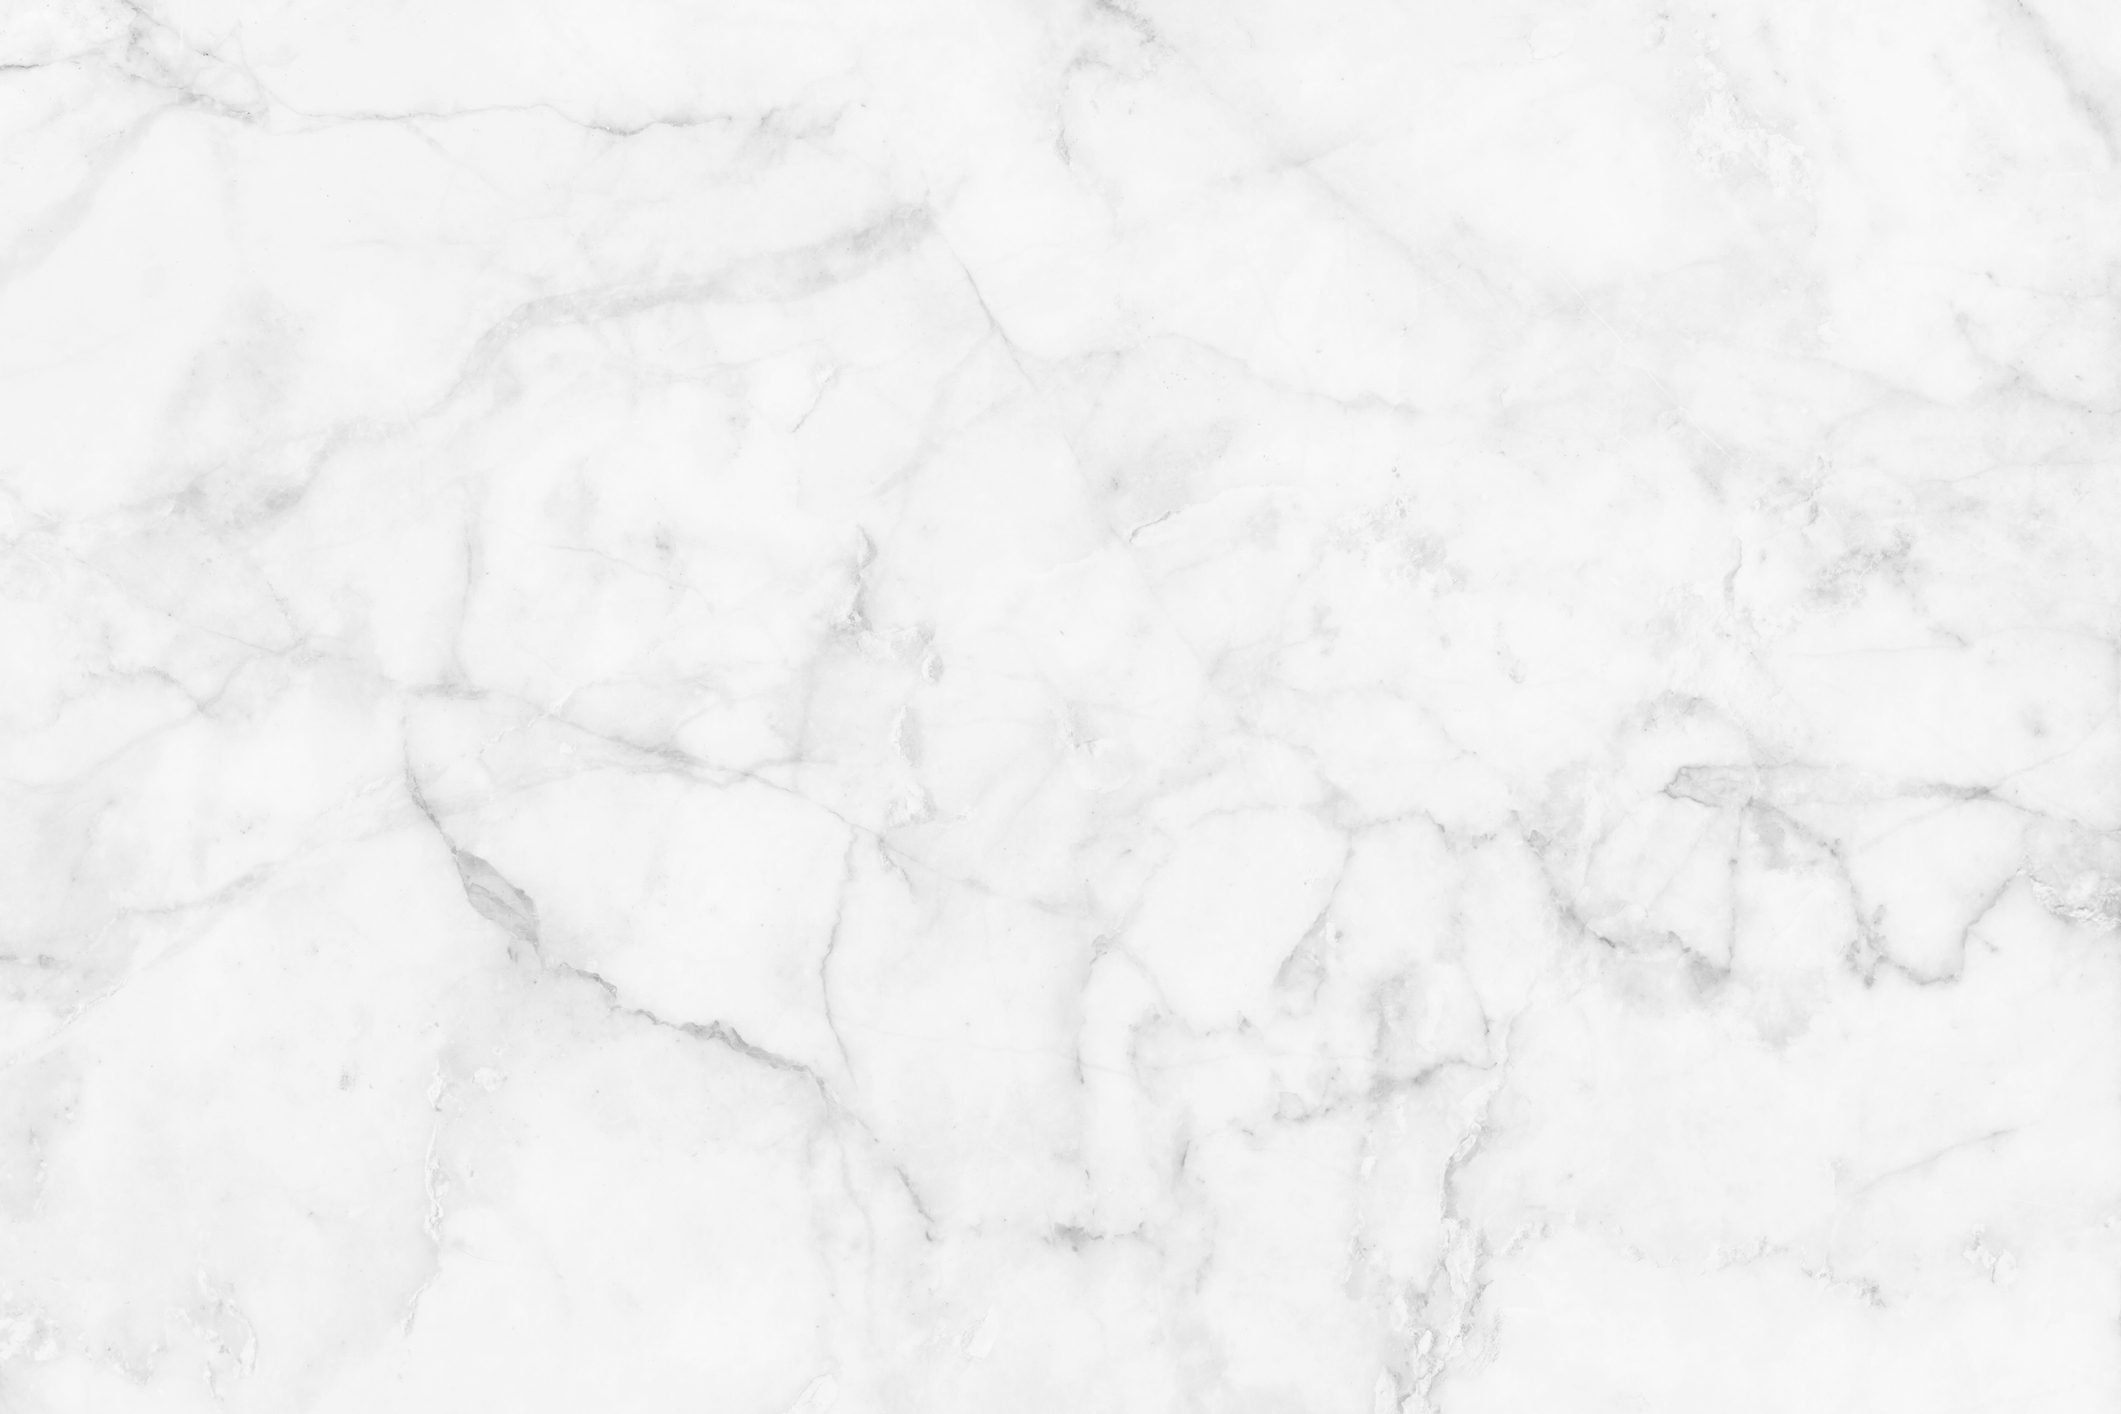 White marble patterned texture.